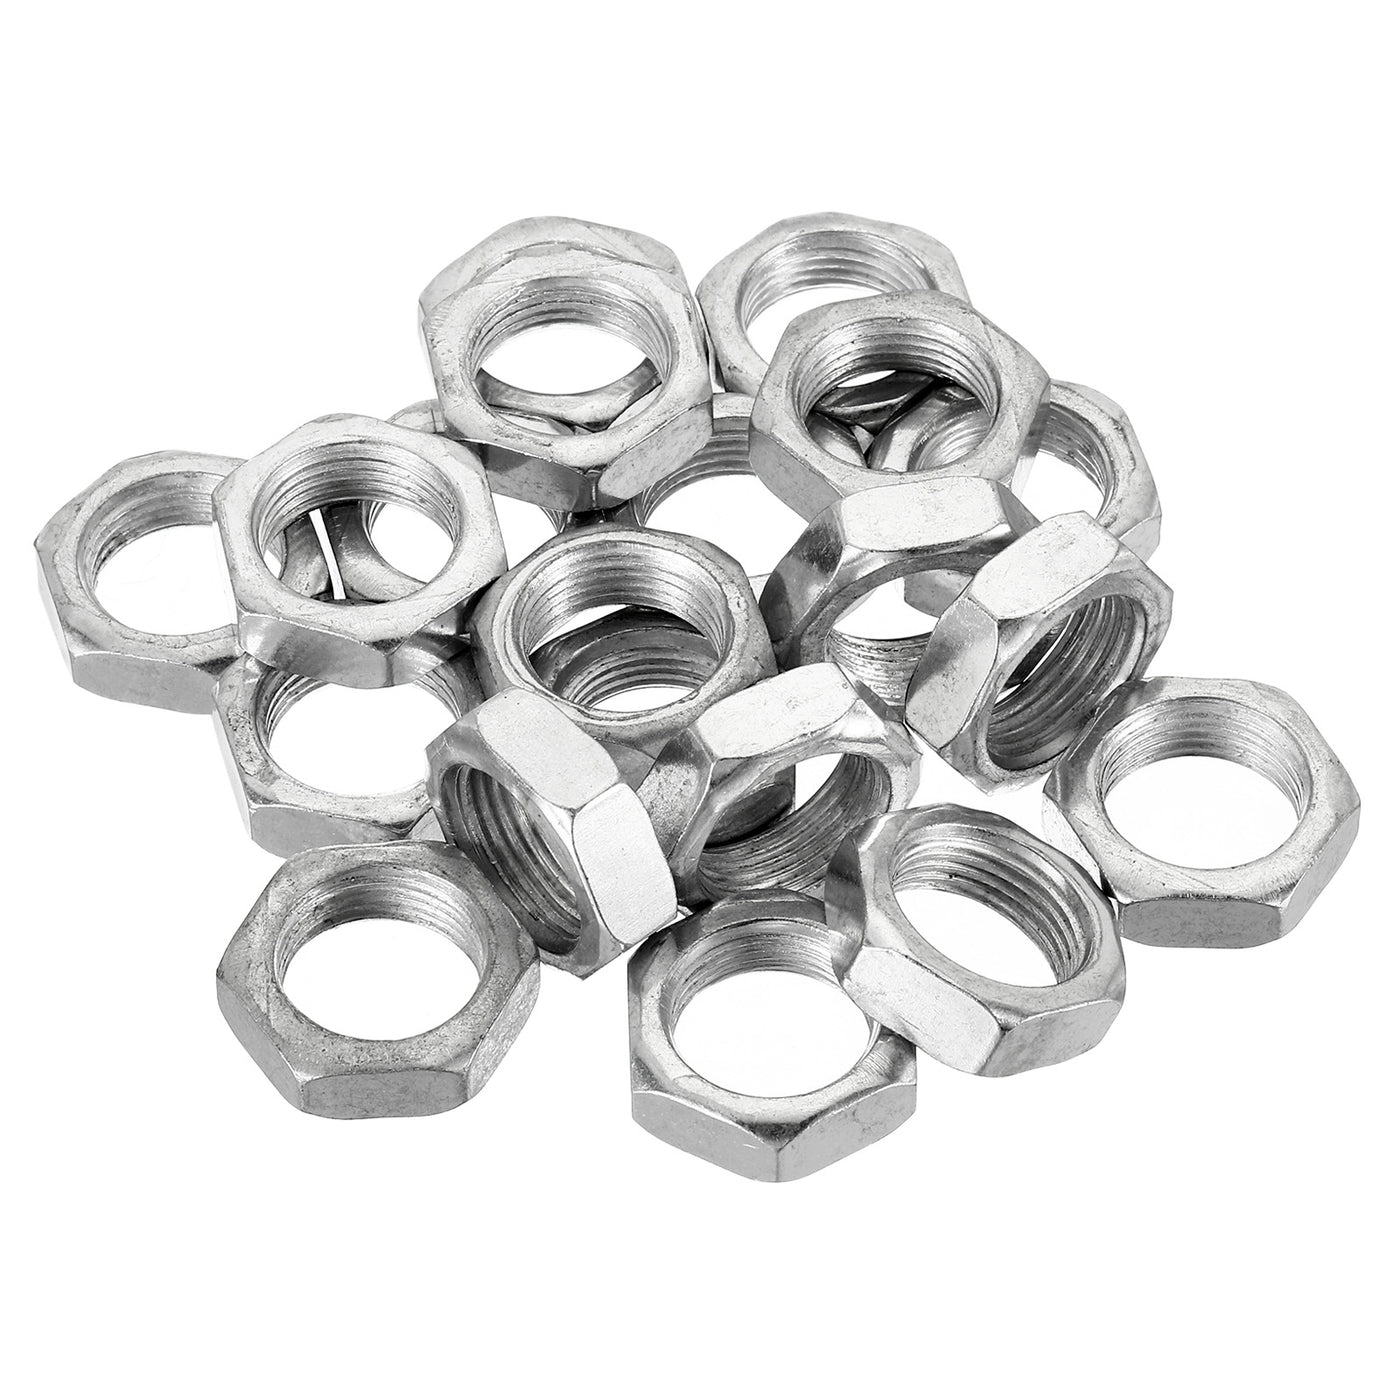 Harfington M20 x 1.5 Steel Hex Nuts, 20 Pack Metric Thread Zinc Plated Finished Hardware Nuts Screw Bolt Fasteners 9mm Height